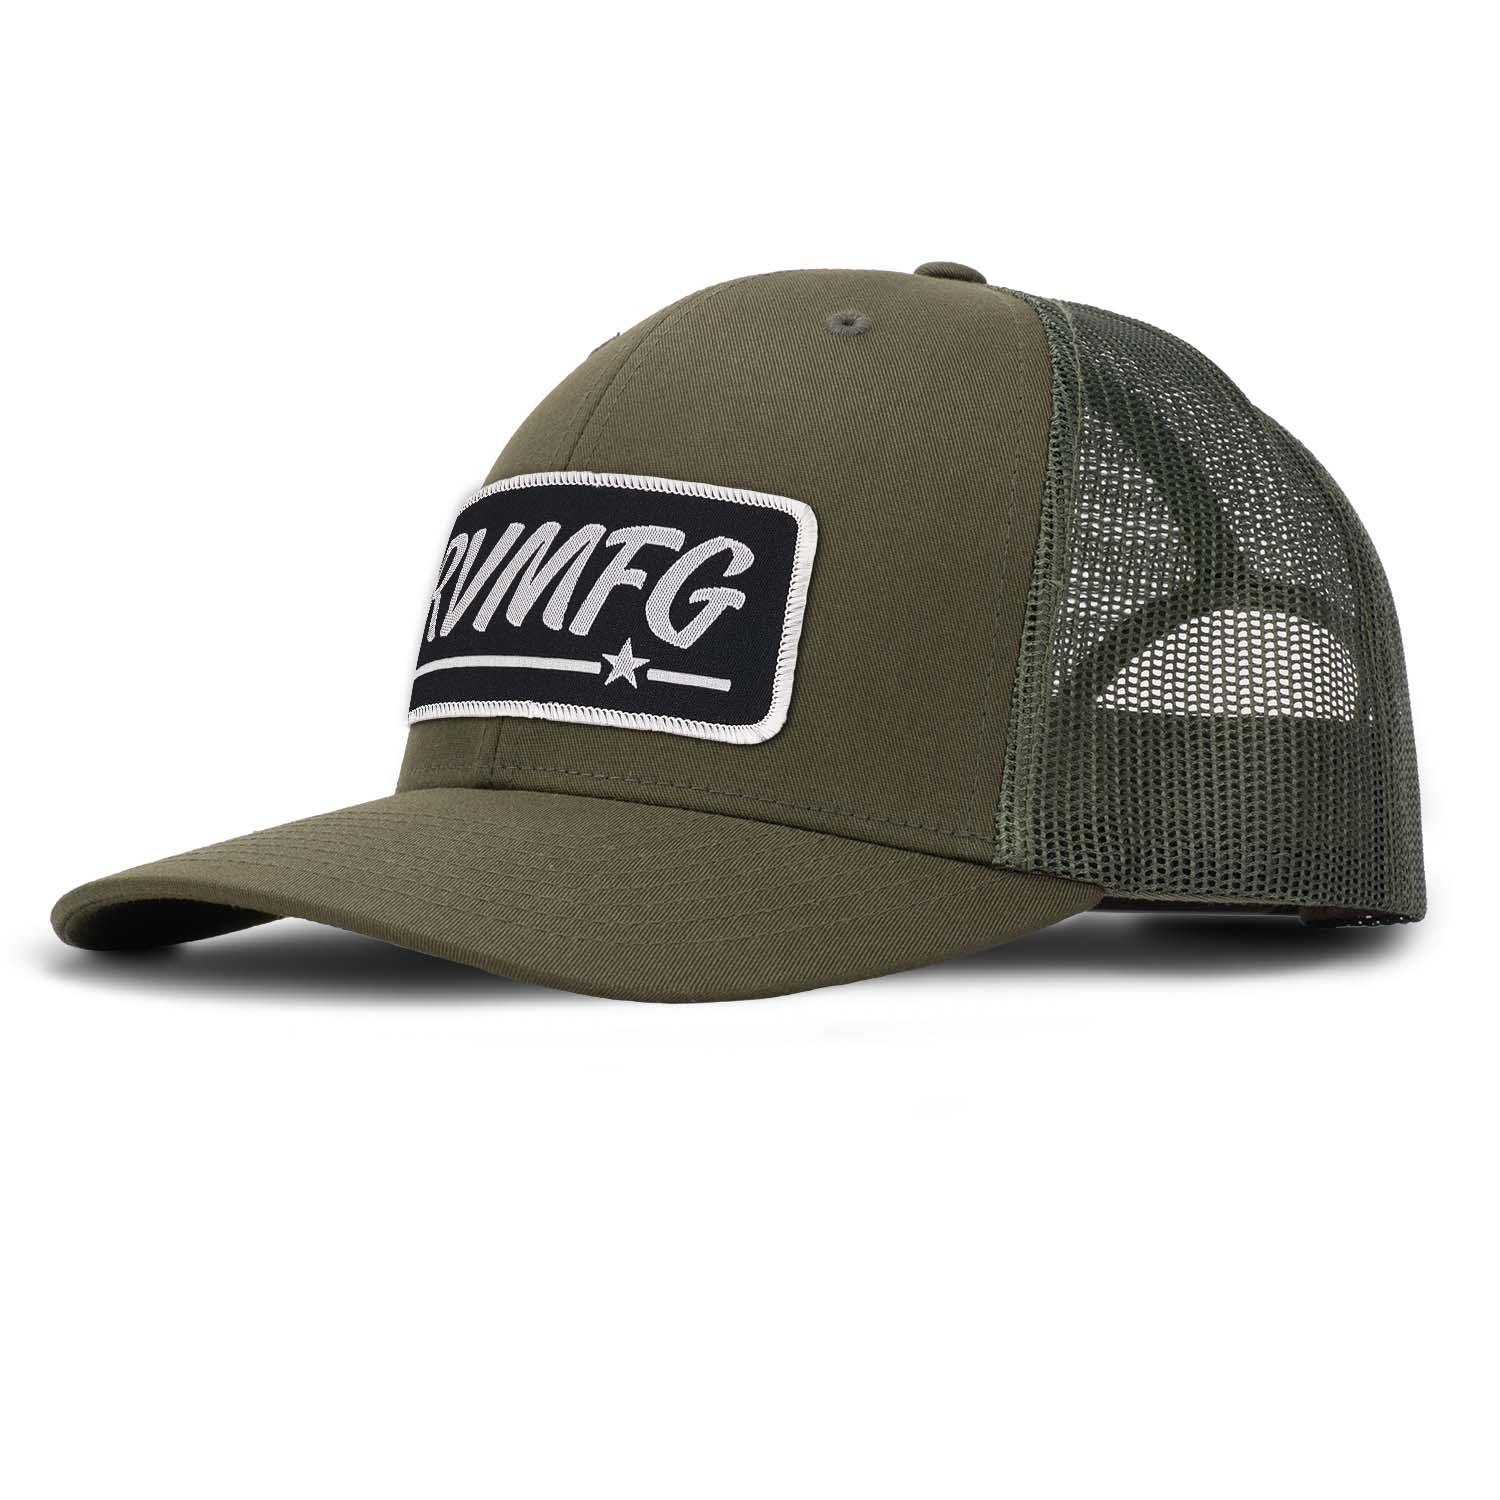 Revolution Mfg classic trucker hat in dark loden with loden mesh with a black woven RVMFG patch with white letters and a white border